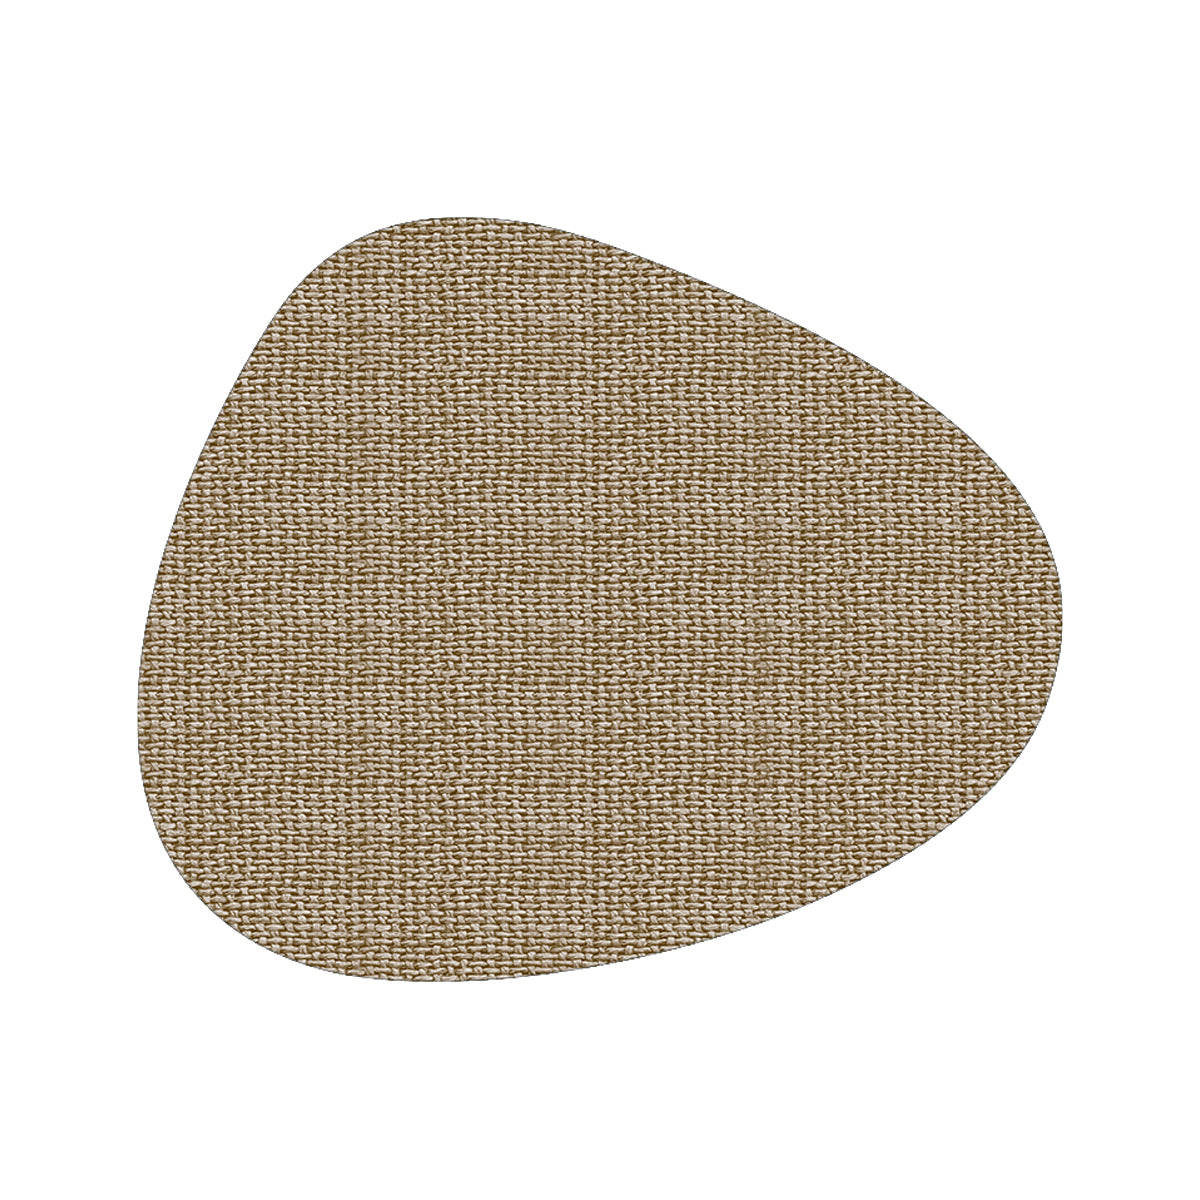 Via Deco Placemat Stone Tempo Linen Braided - Assorted Colors